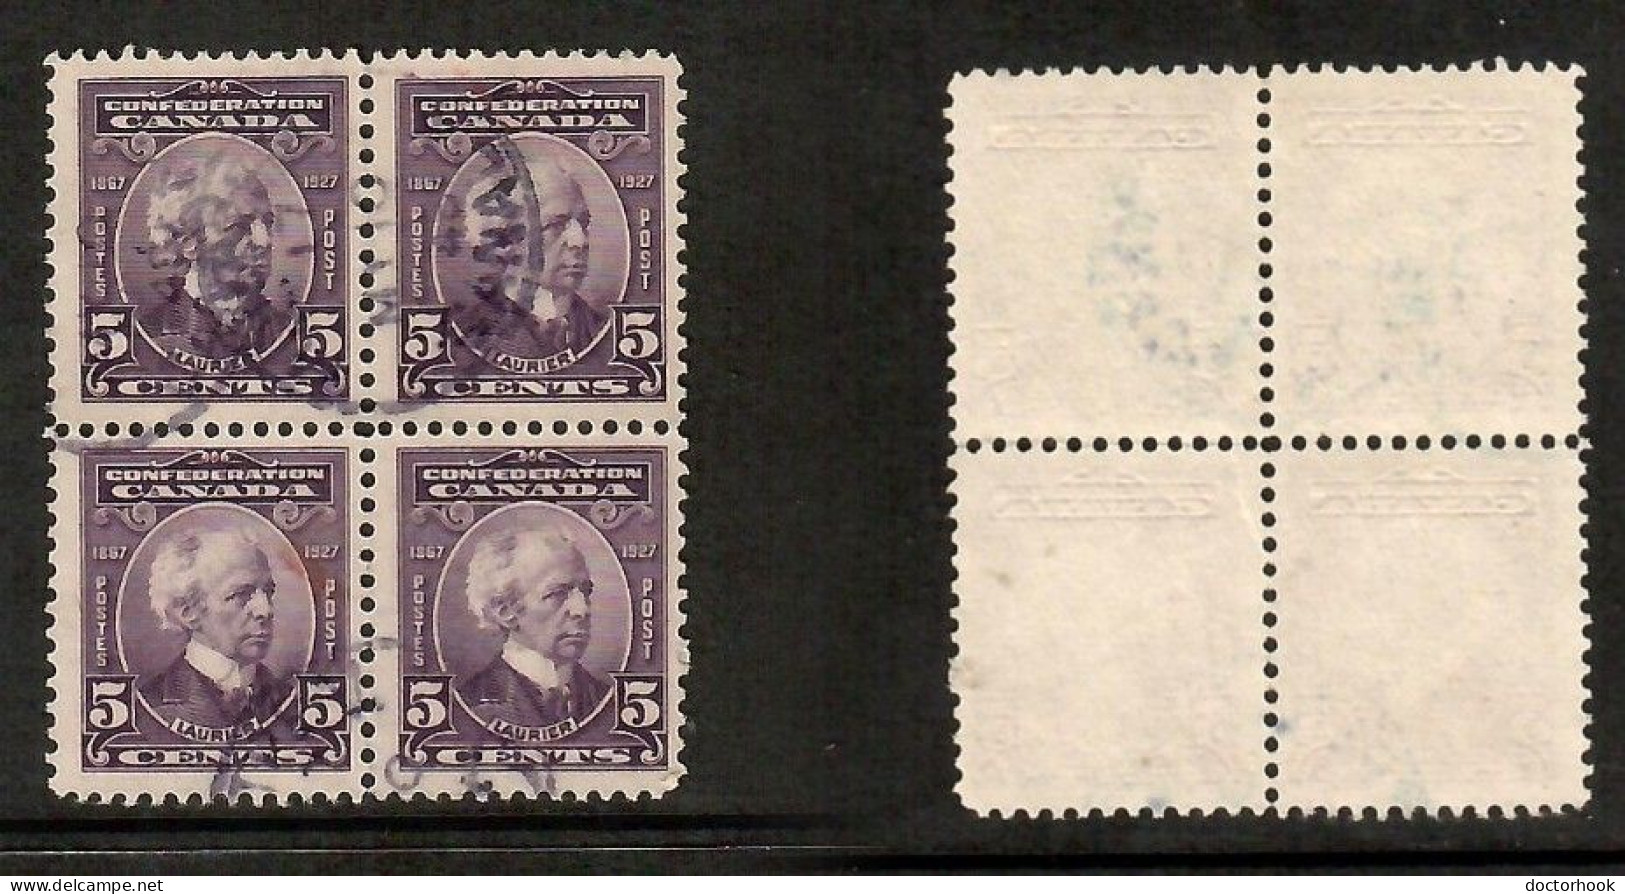 CANADA   Scott # 144 USED BLOCK Of 4 (CONDITION AS PER SCAN) (CAN-207) - Blocs-feuillets